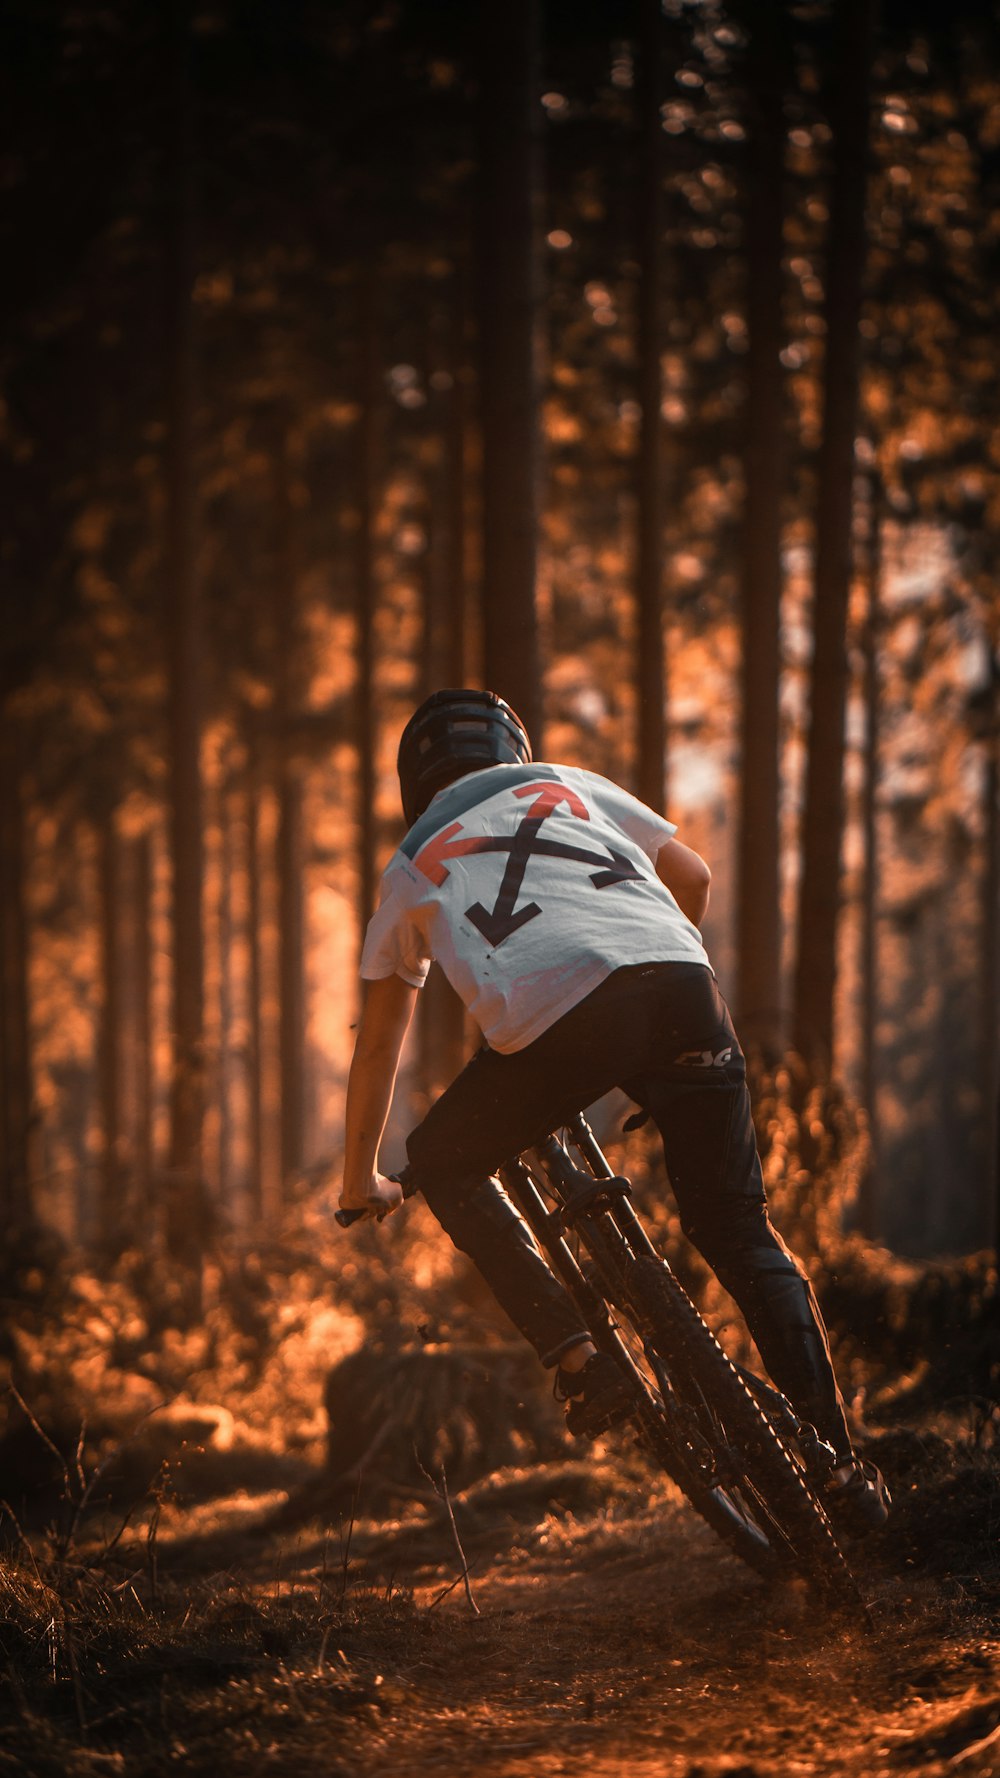 Mtb Pictures | Download Free Images on Unsplash